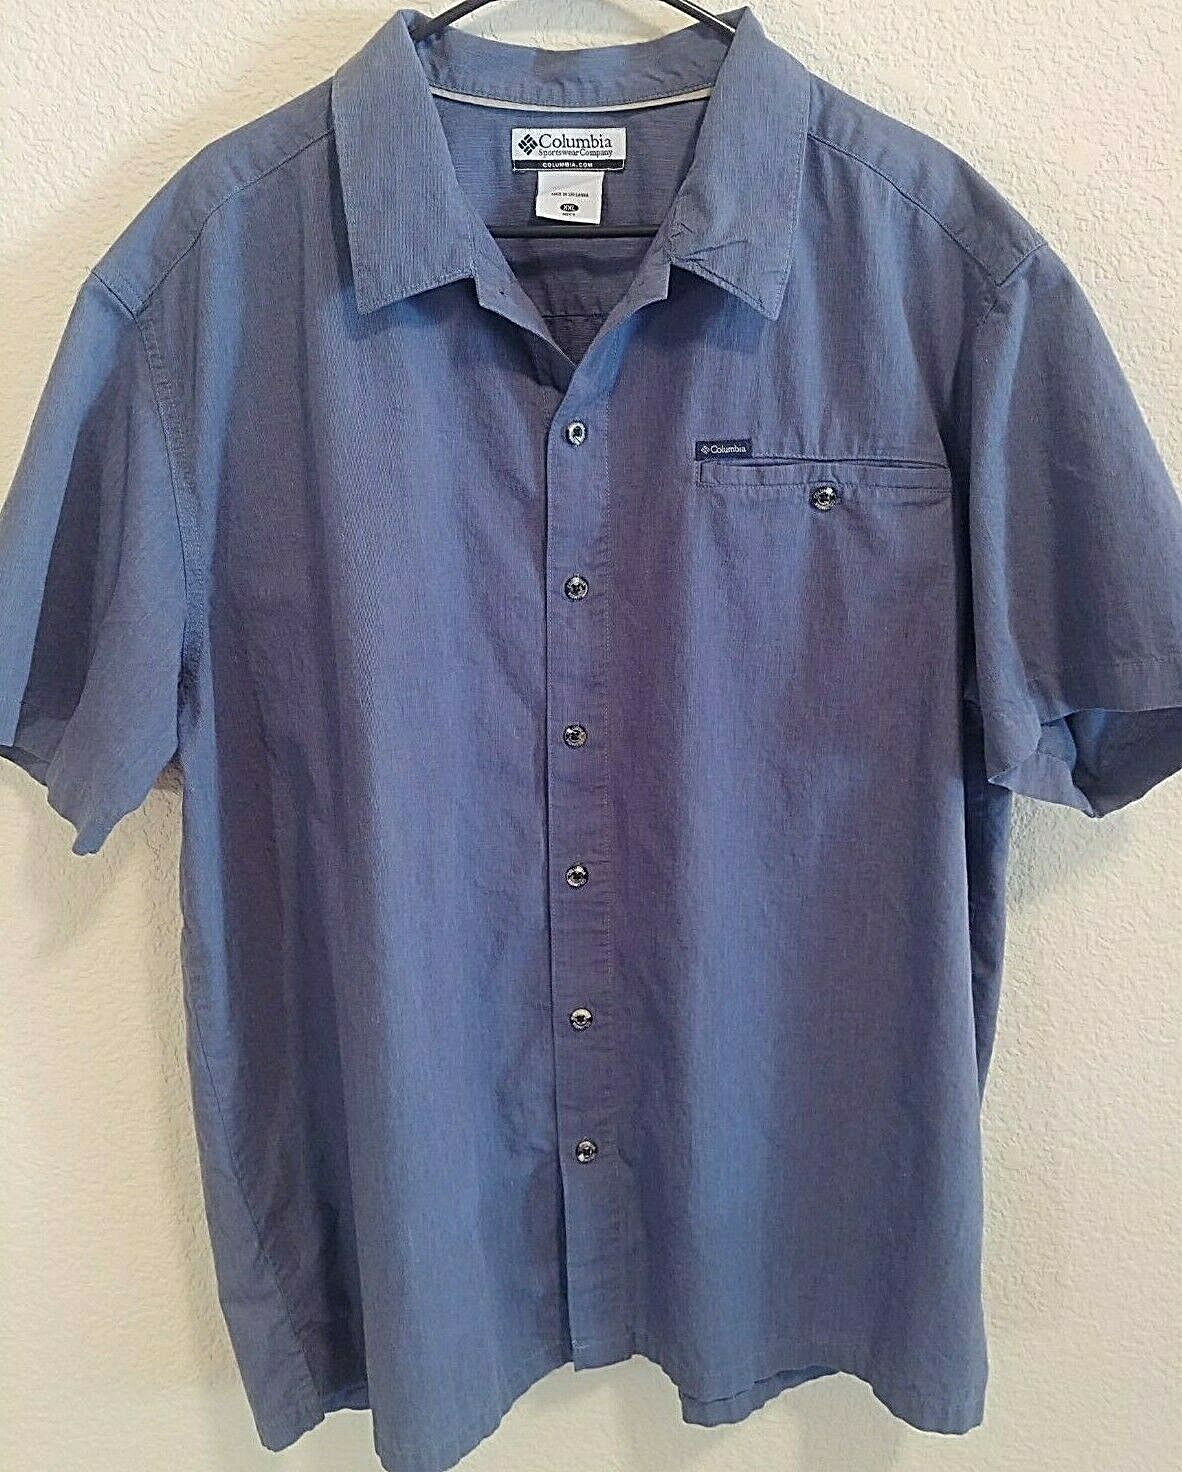 Primary image for Men's Columbia XXL Shirt Short sleeved button front